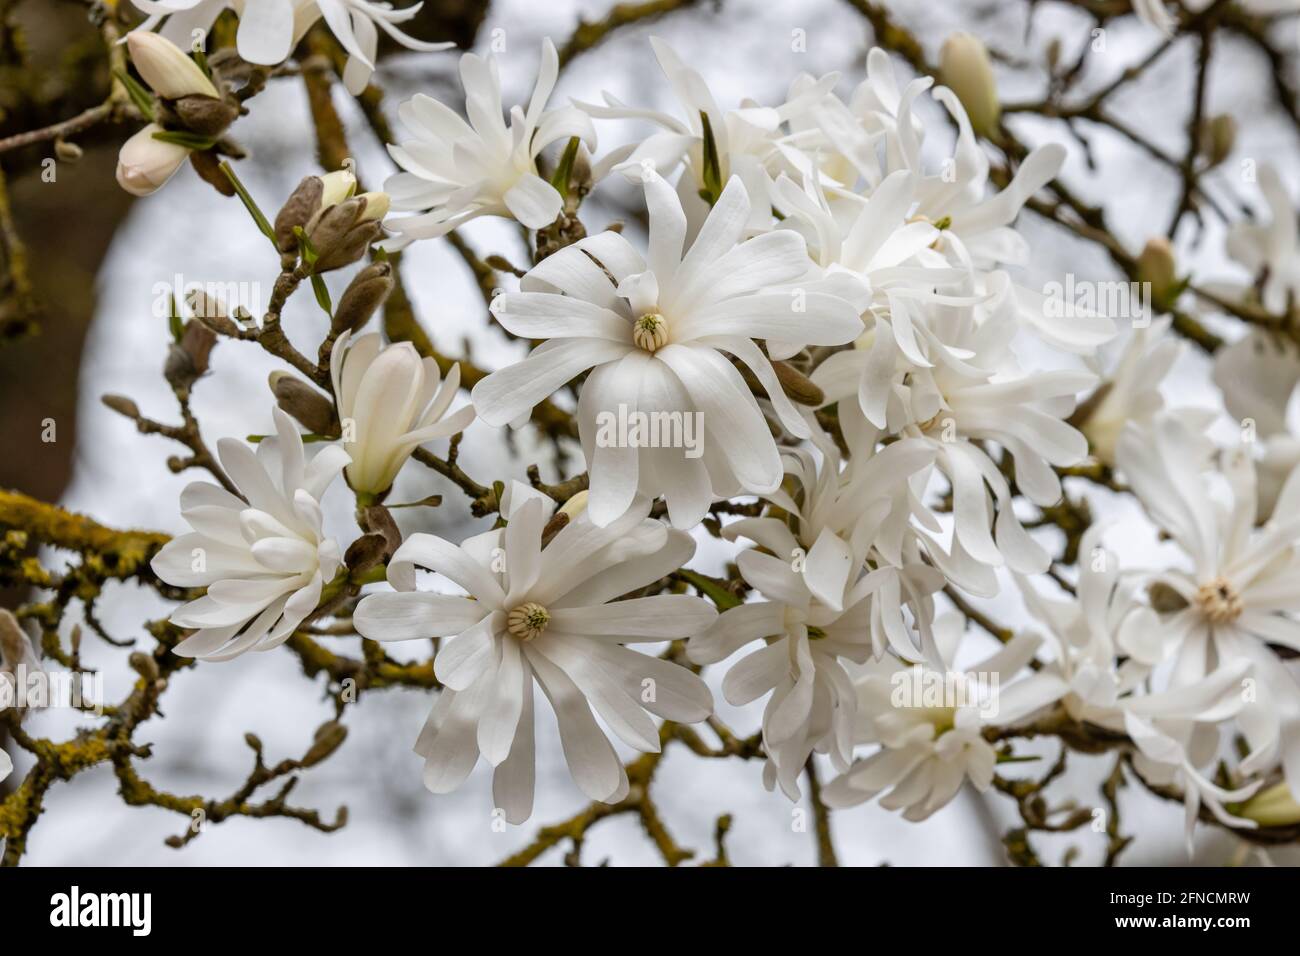 Mass of star shapped whiteMagnolia Stellata Royal Star flowers in spring Stock Photo